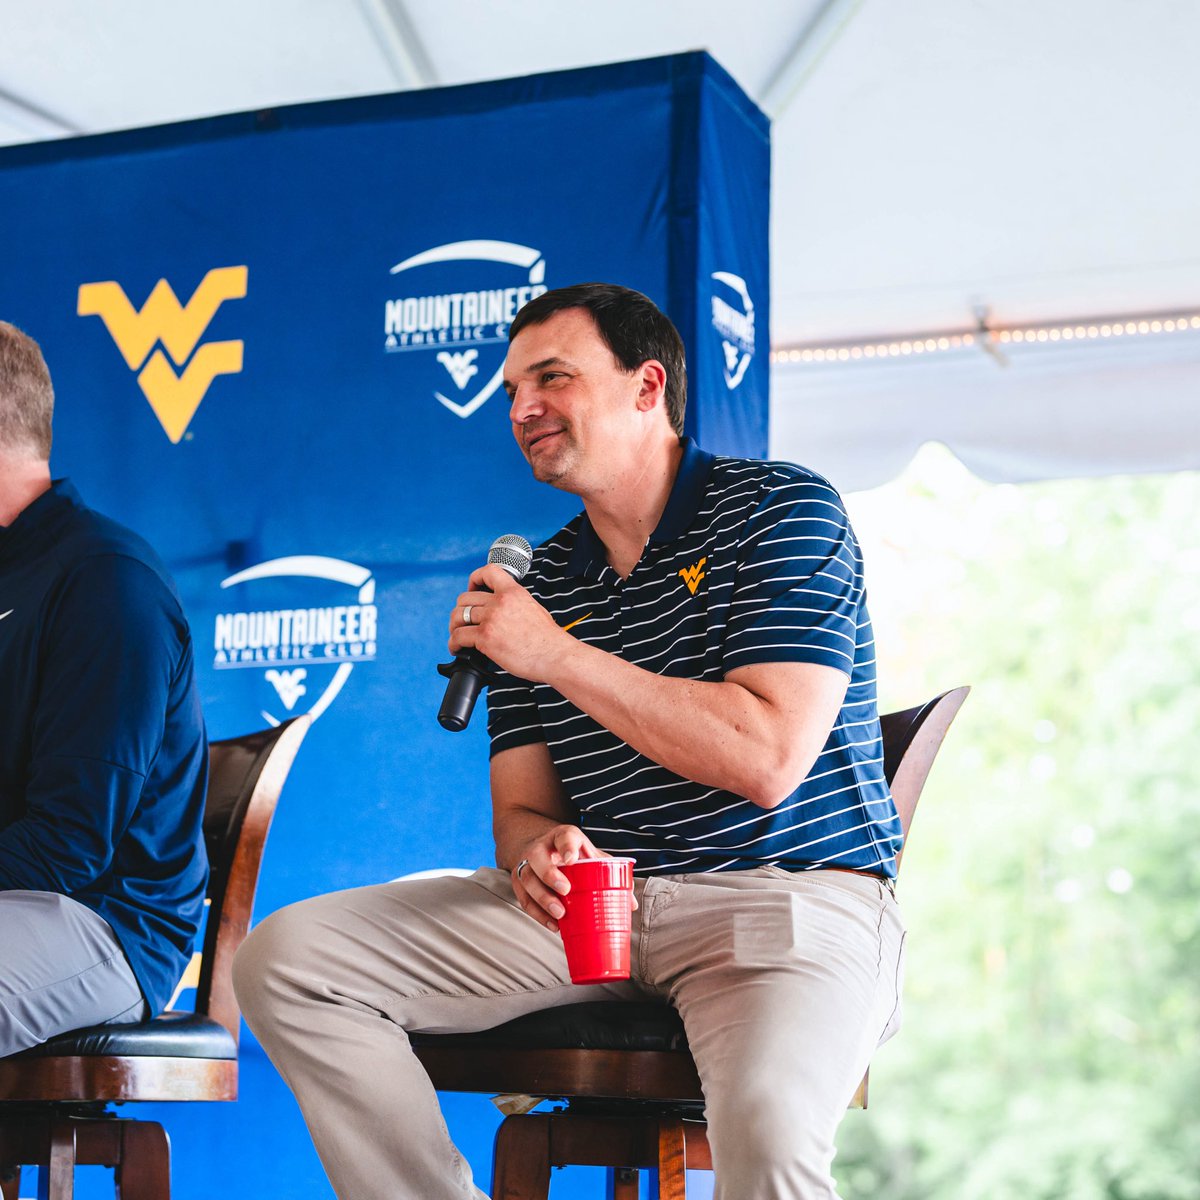 Want to thank all the fans who showed up at the Coaches Caravan this week. @WVU_MAC did a great job. It’s a great time to be a Mountaineer!